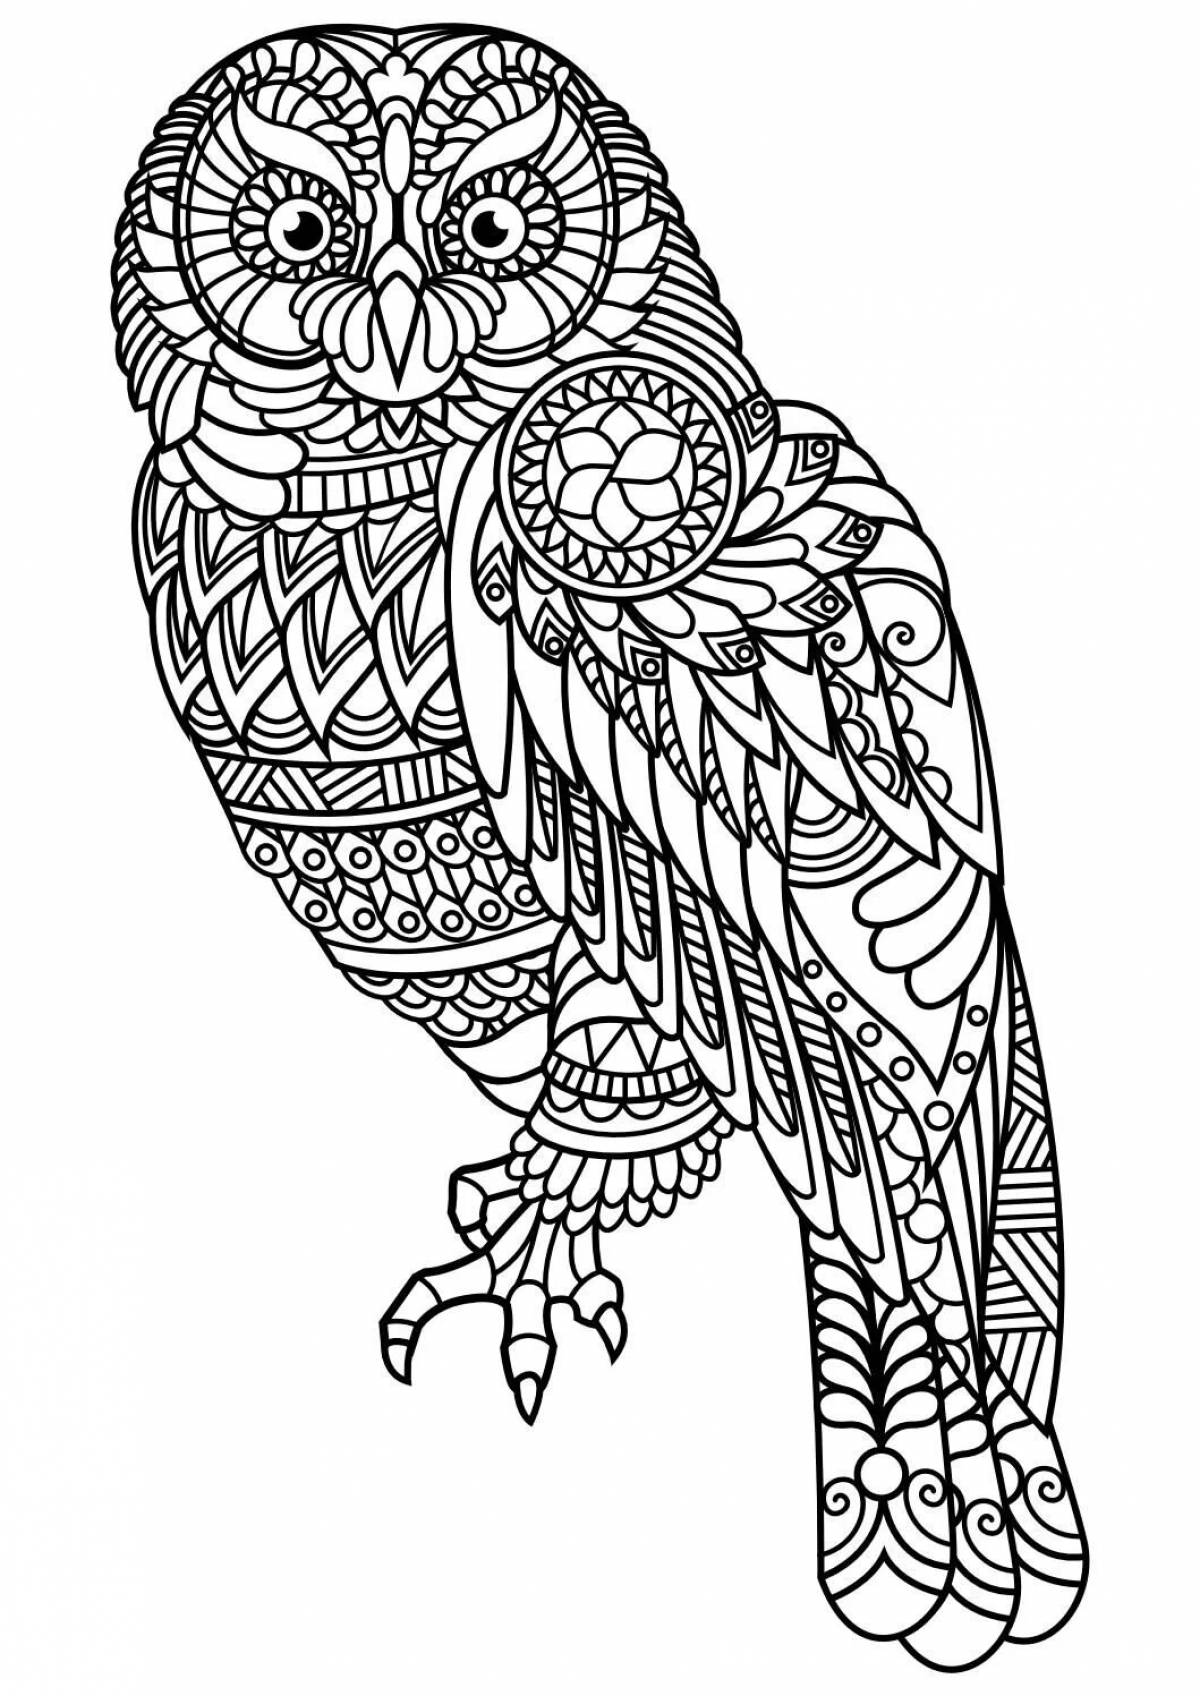 Coloring book with colorful patterned animals